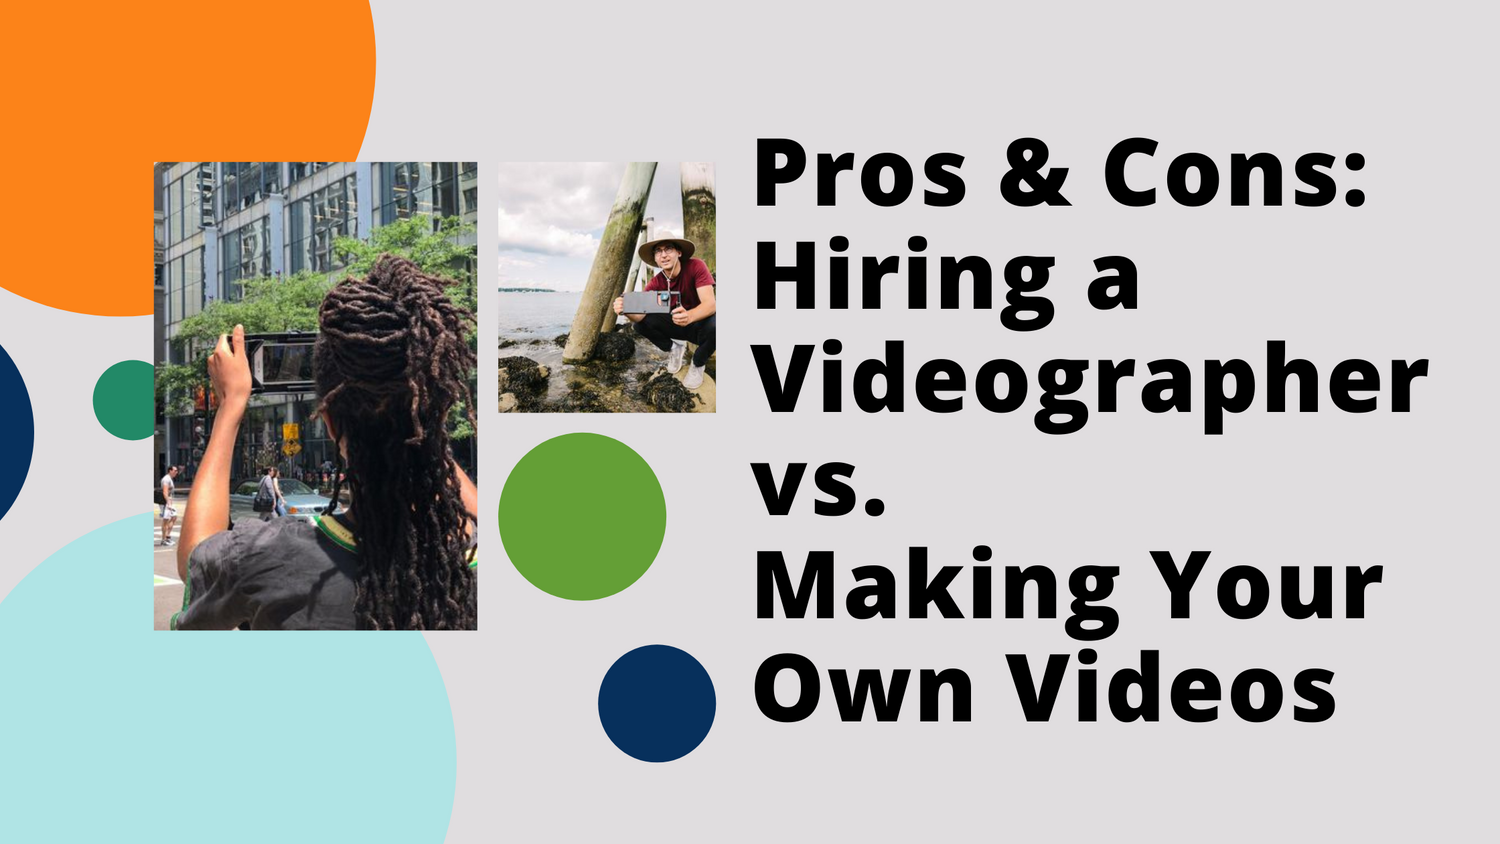 Pros and Cons: Hiring a Videographer vs. Making Your Own Videos